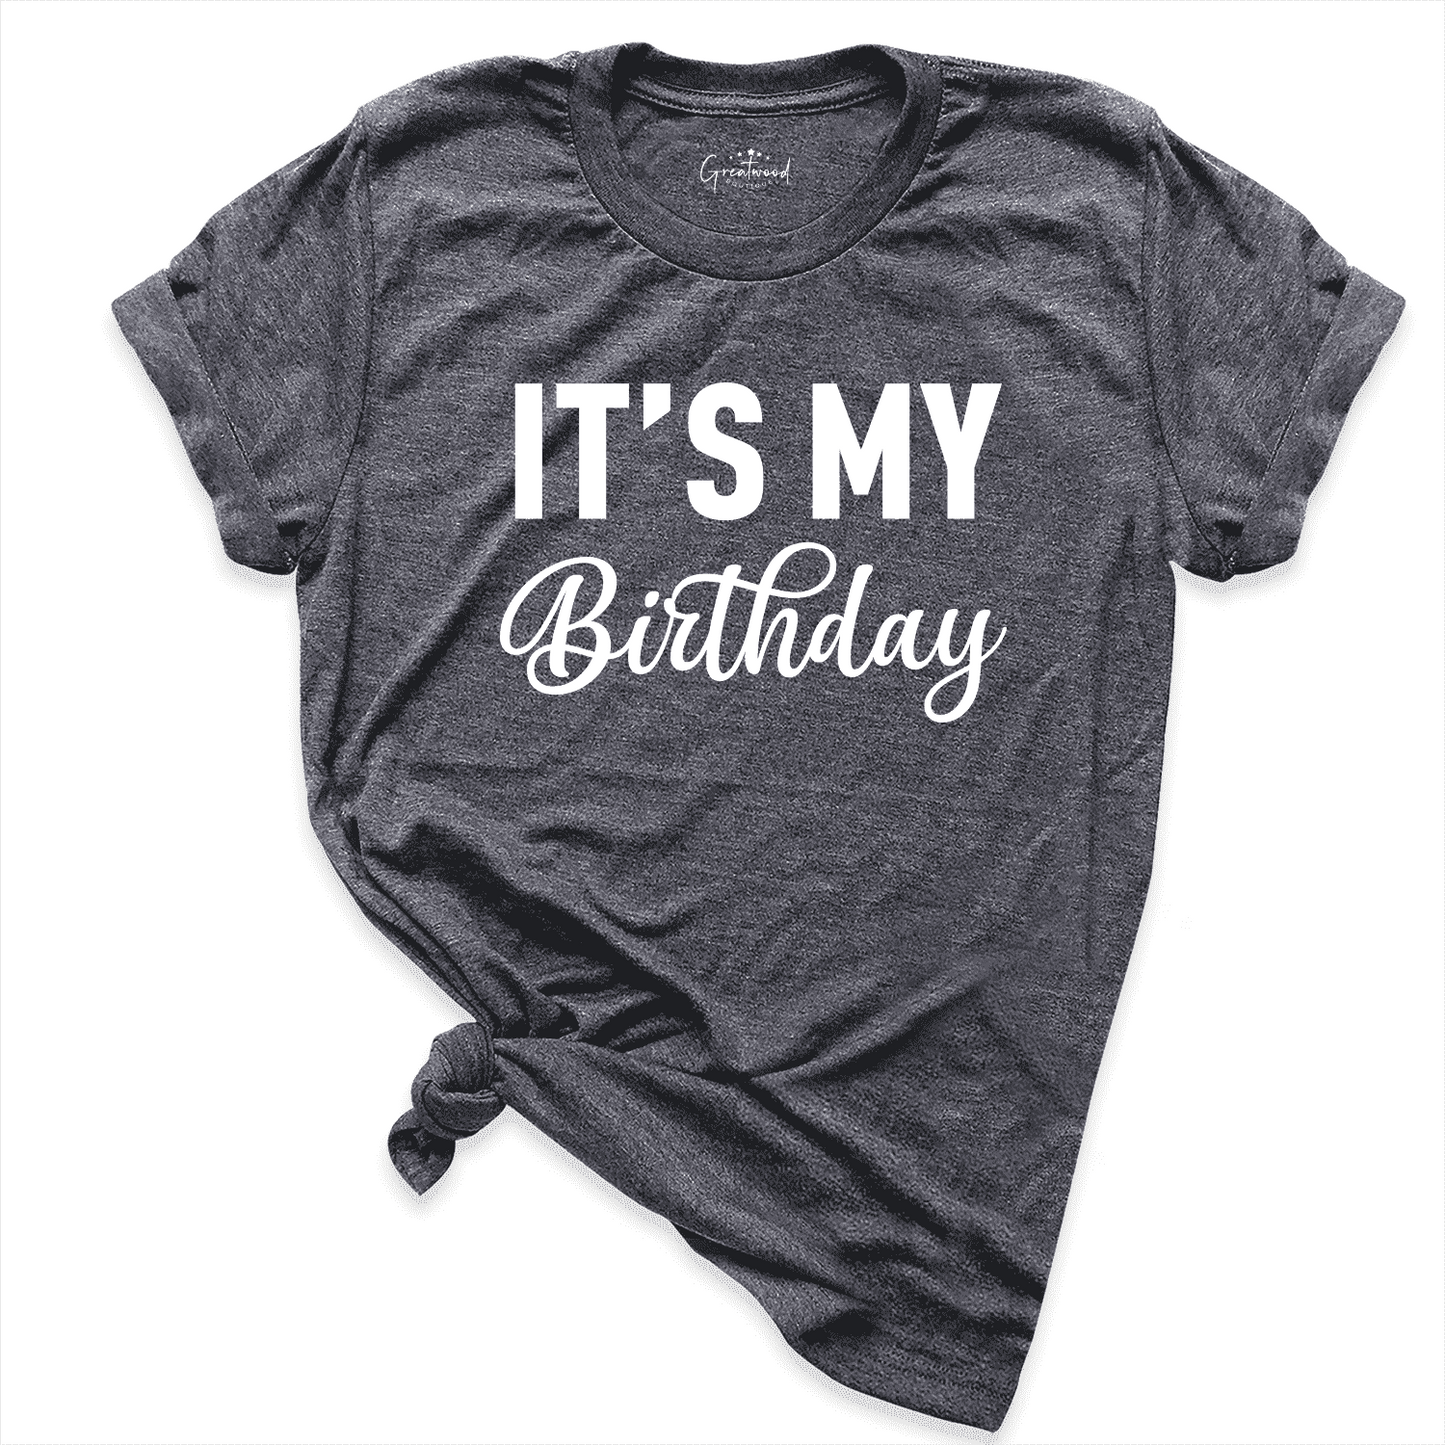 It's my Birthday Shirt D.Grey - Greatwood Boutique